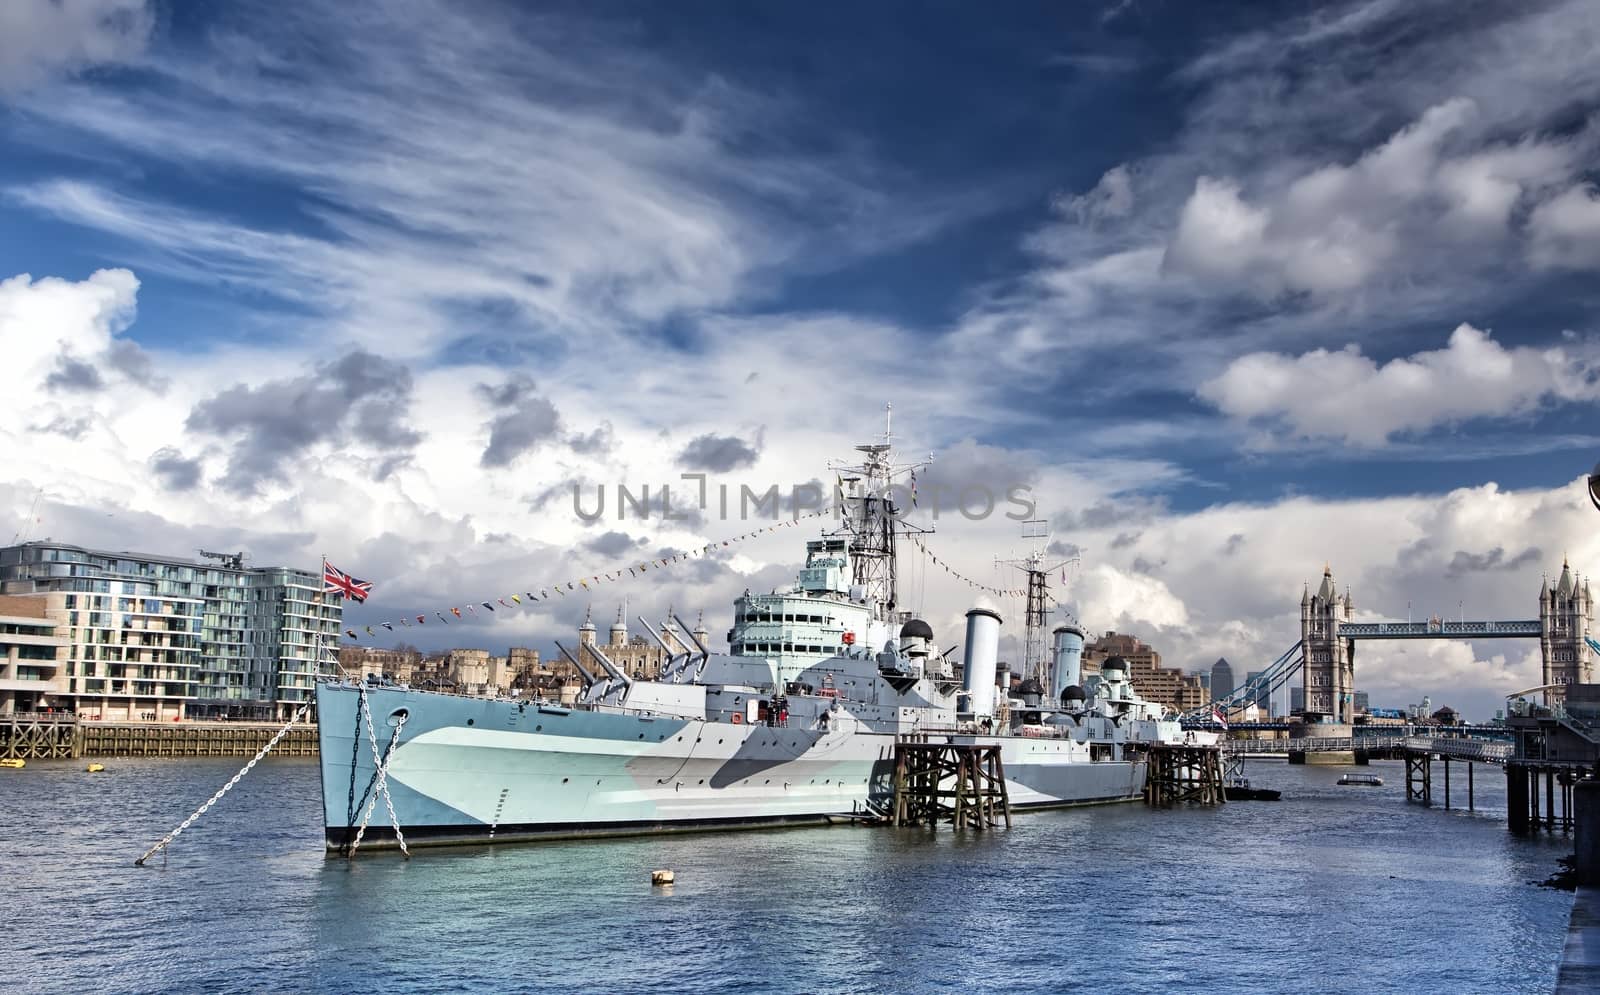 The HMS Belfast (1930s) is the Royal Navy’s last surviving cruiser and the largest preserved in Europe.